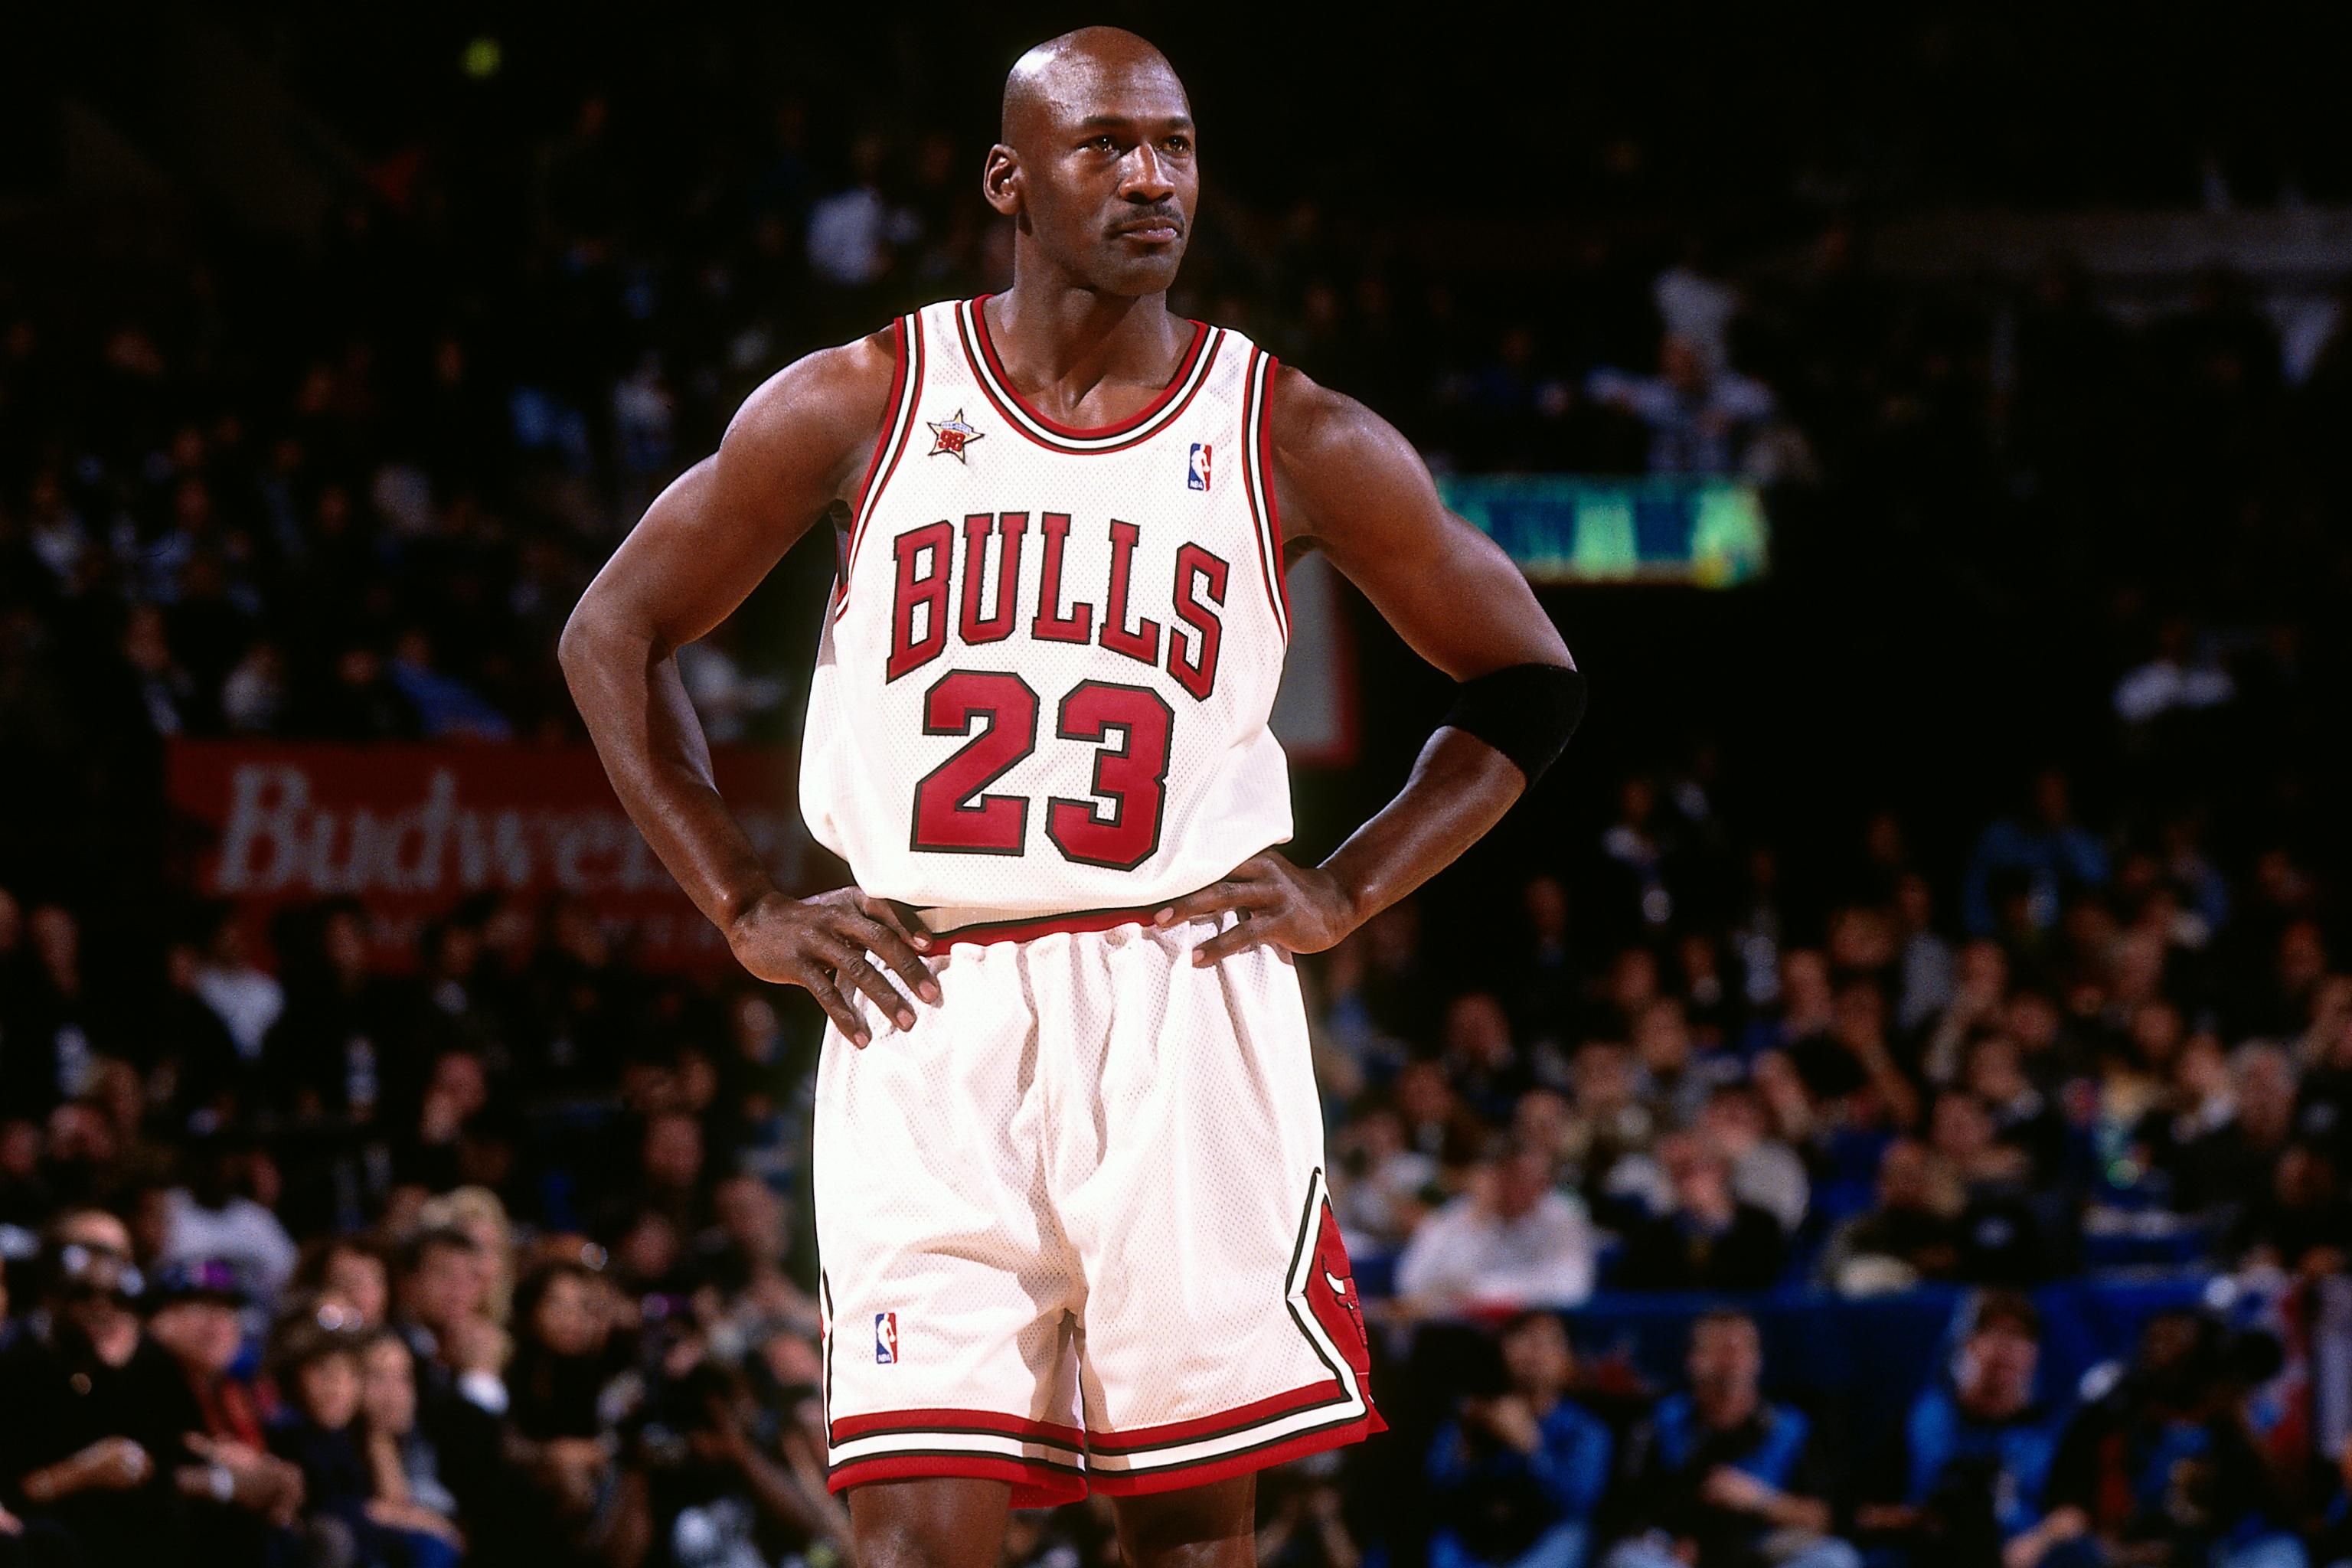 Why did Michael Jordan's jersey number change from 23 to 45 during his  second Chicago Bulls stint